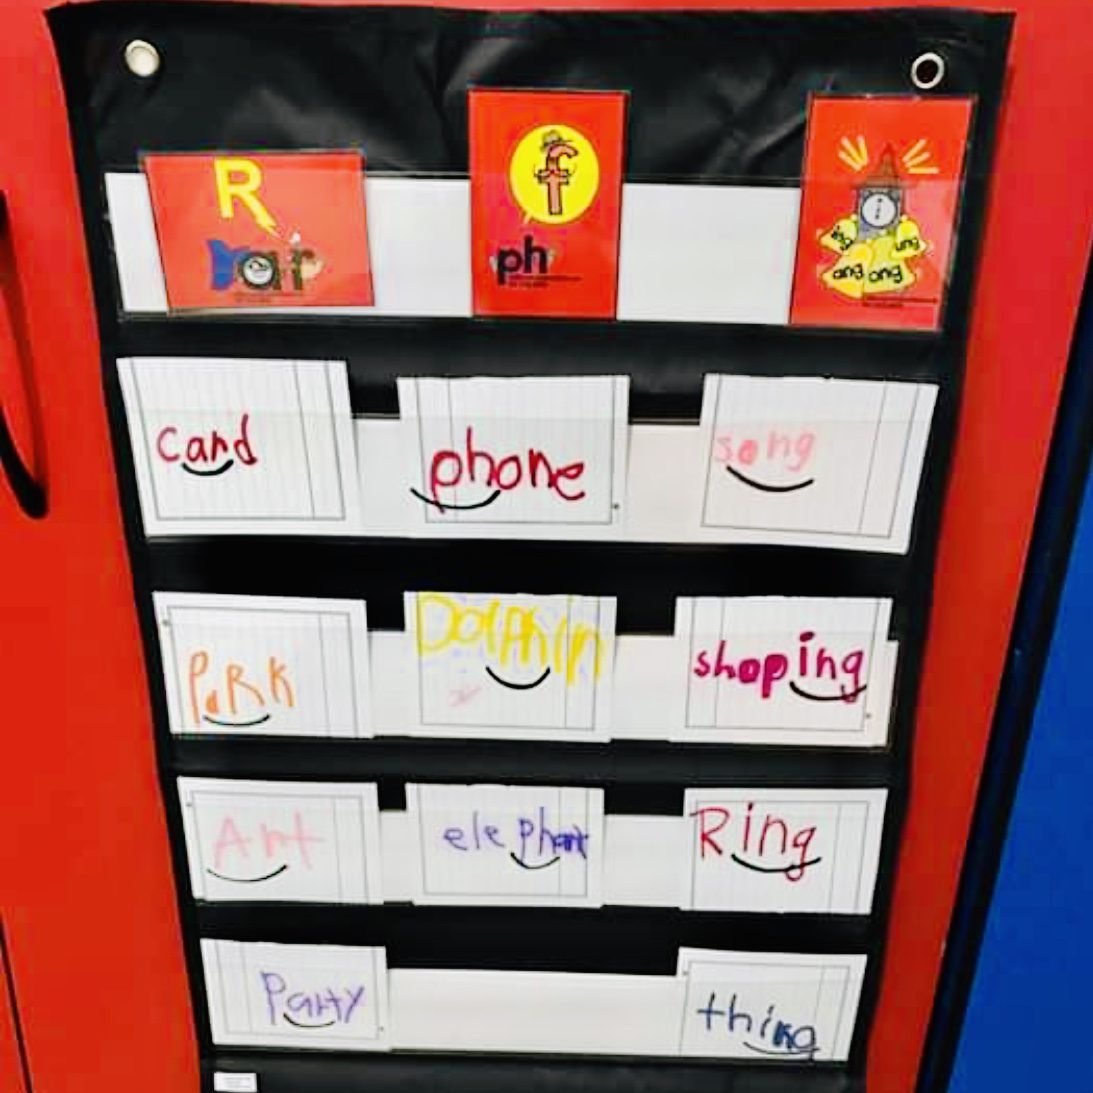 Decoding Sight Words with Phonics